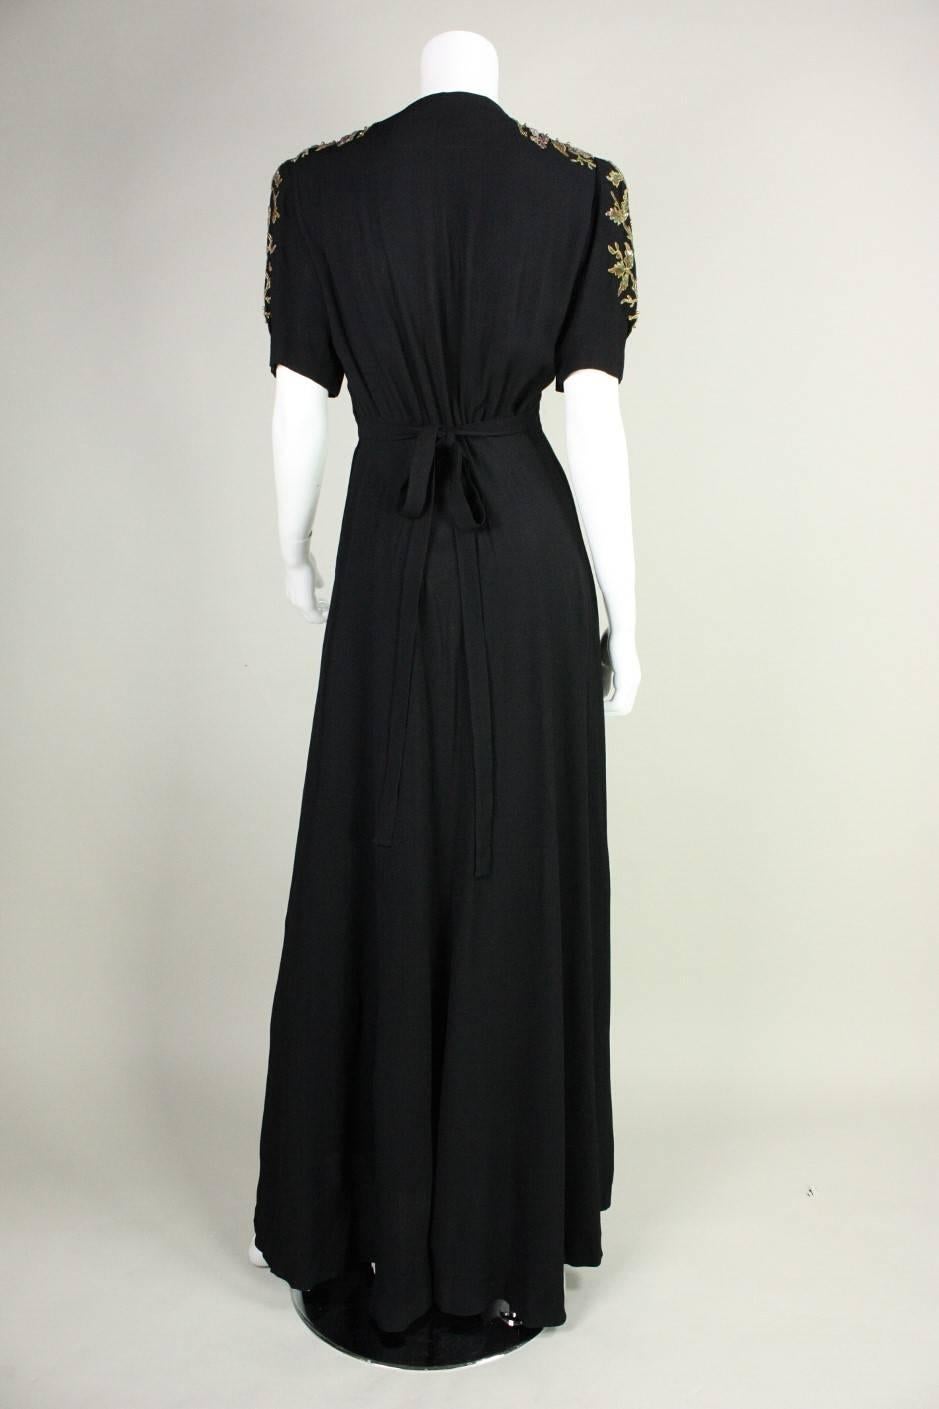 Women's 1940's Crepe Gown with Beaded Bodice